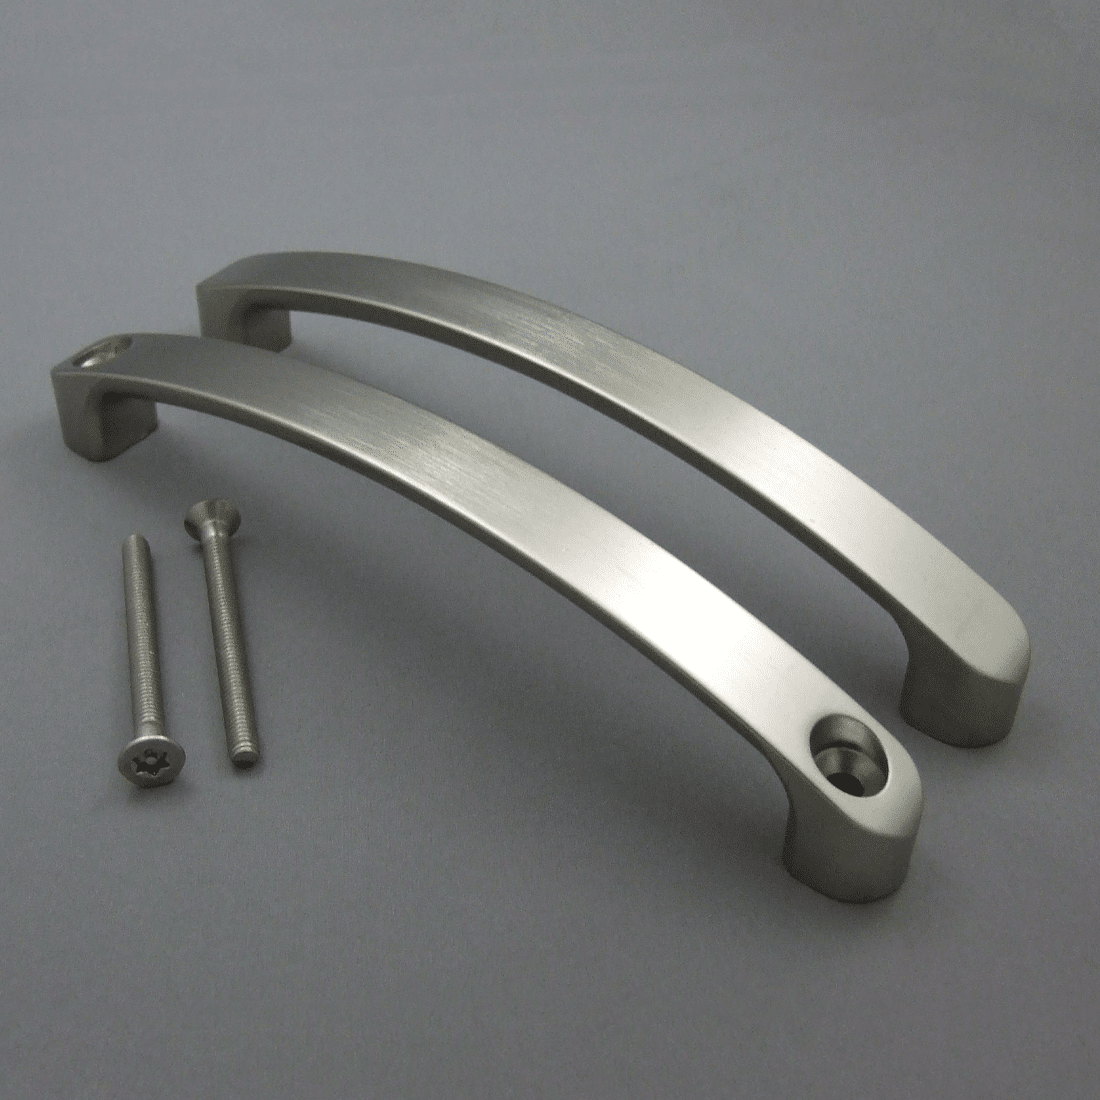 https://www.partitionplus.com/wp-content/uploads/2021/01/stainless-steel-610112.png